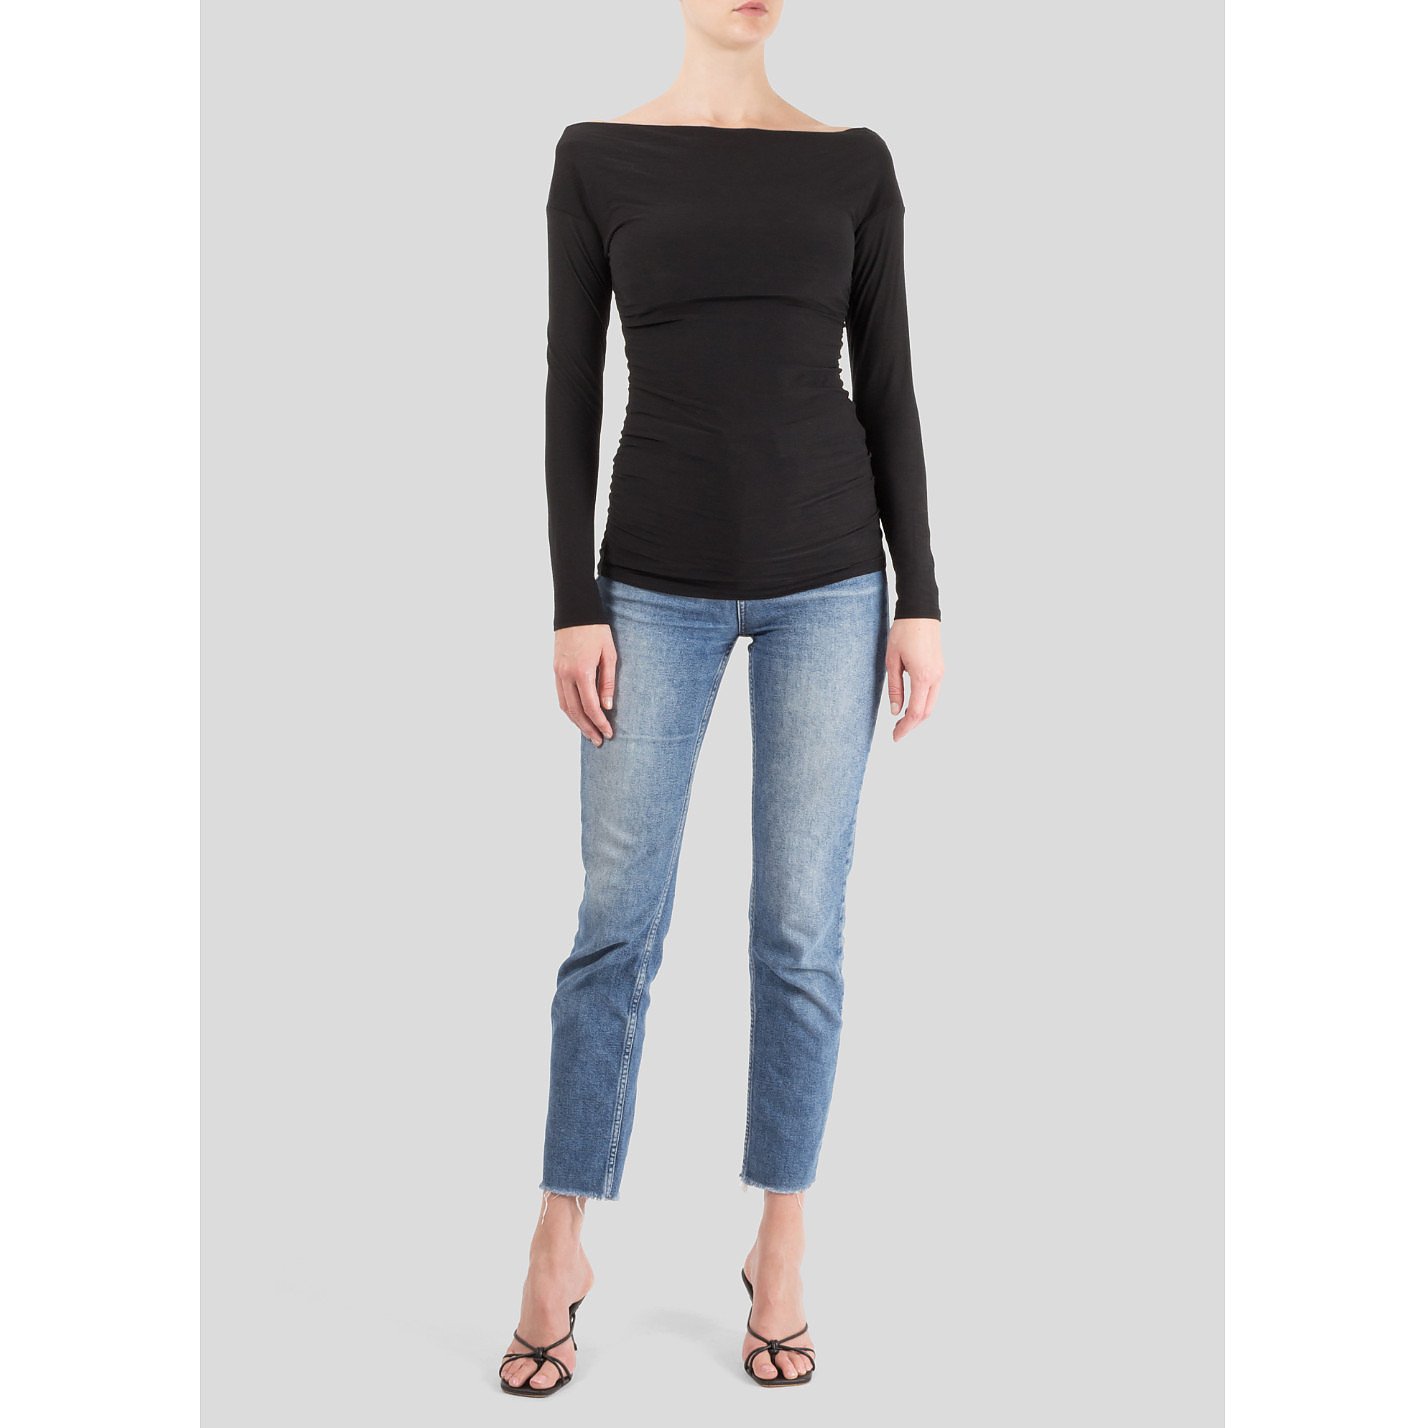 James Perse Ruched Boat Neck Top